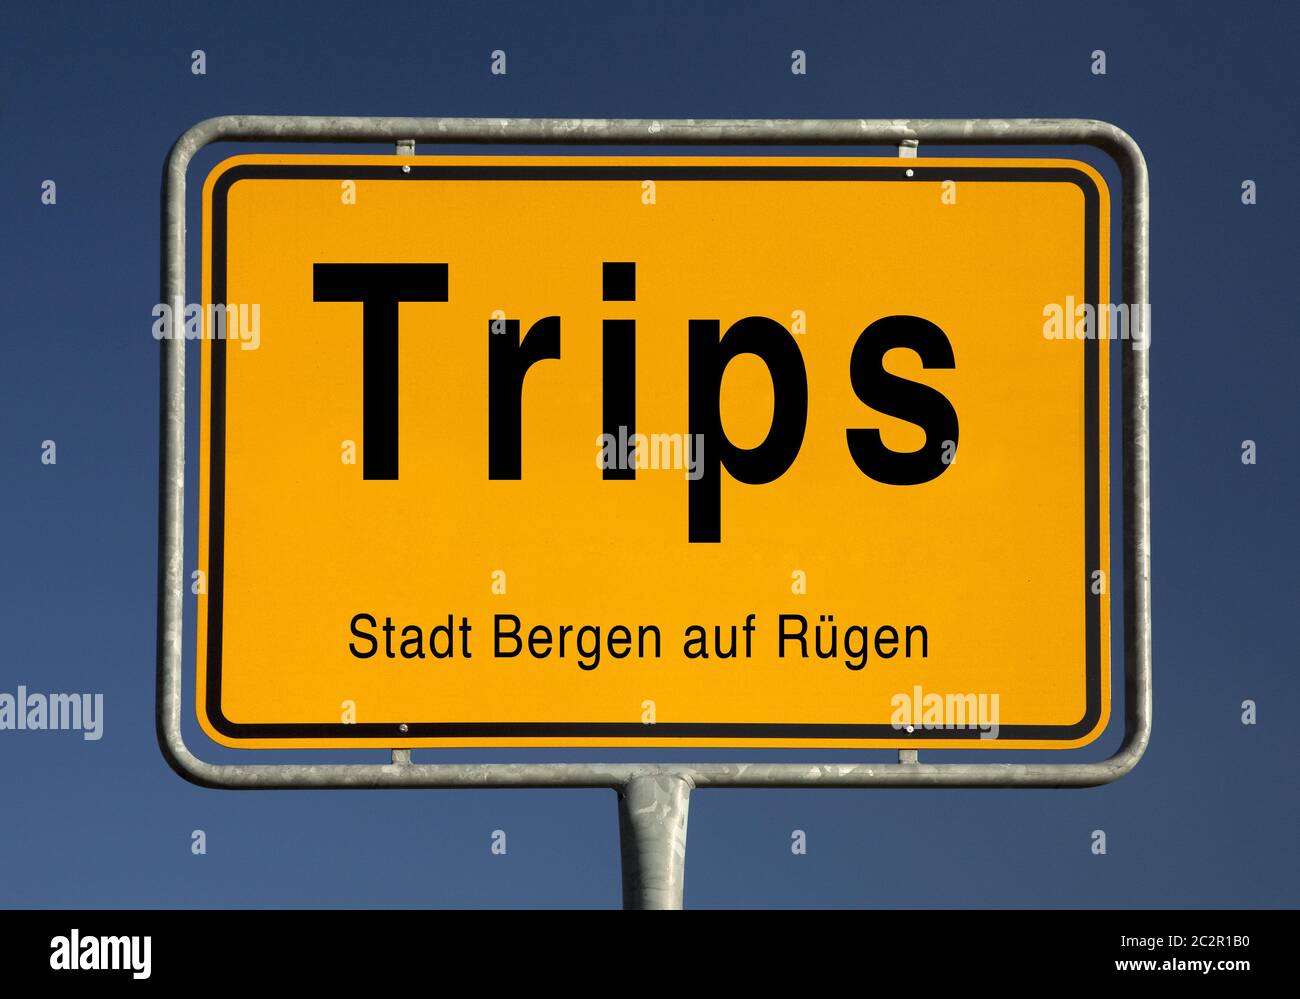 Town entrance sign of Trips, part of the city of Bergen on Ruegen, Mecklenburg-Vorpommern, Germany Stock Photo